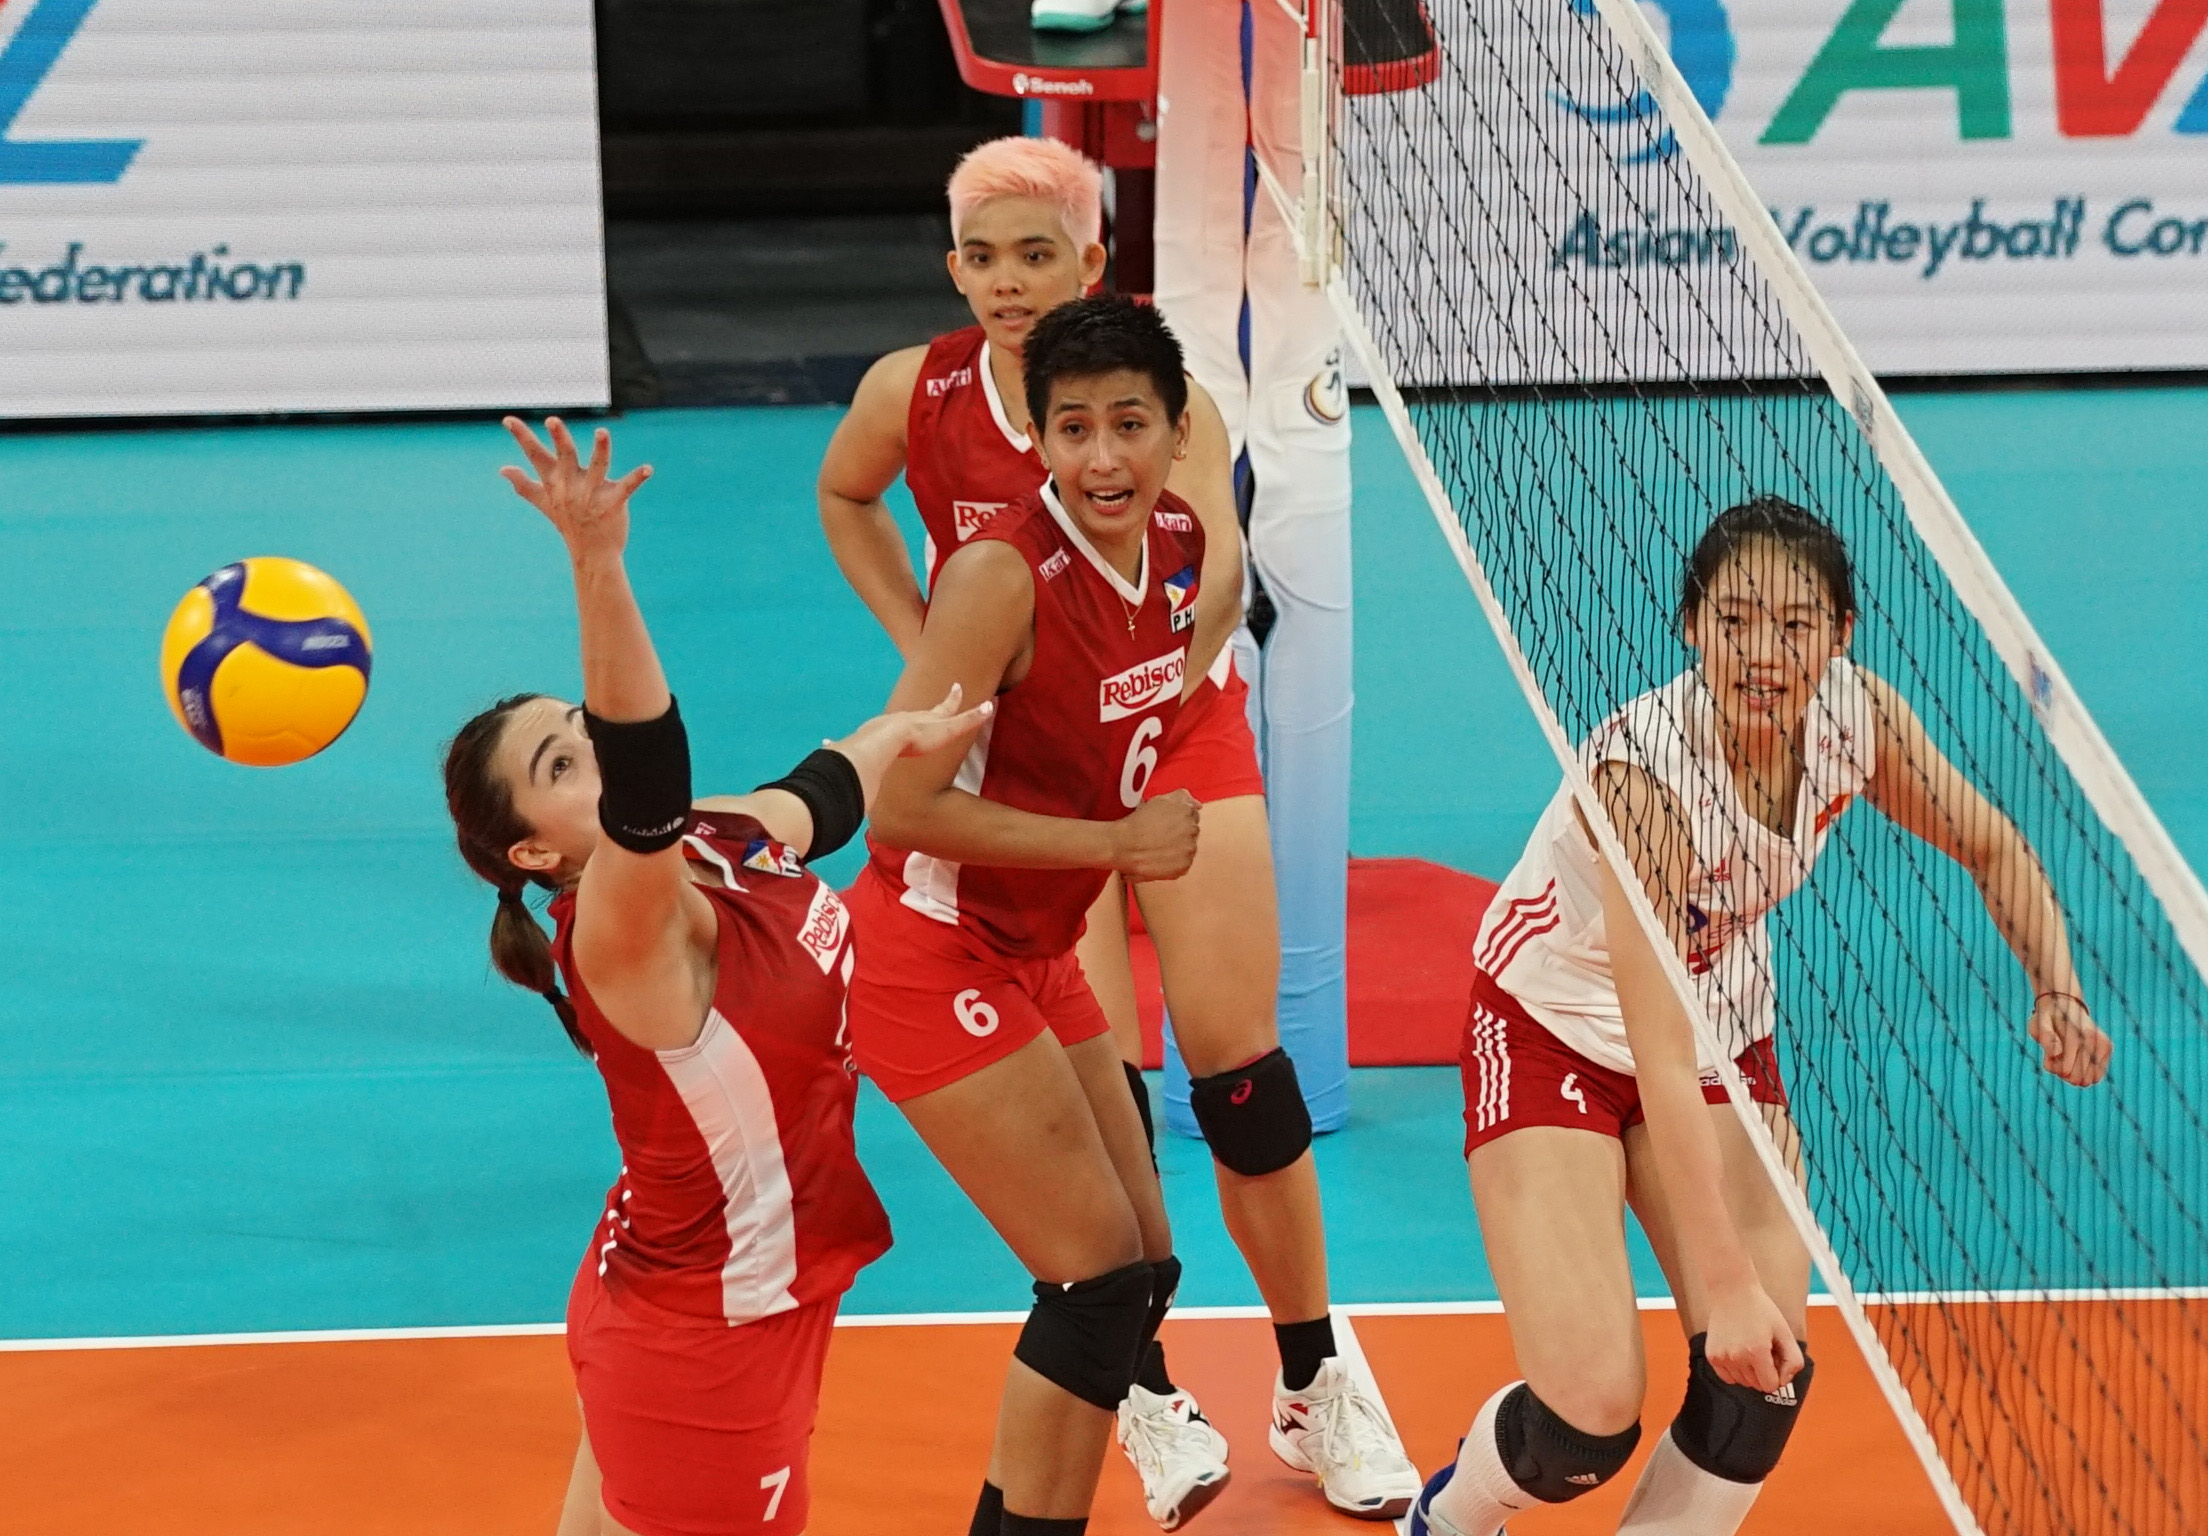 Michele Gumabao chases after the ball during an AVC Cup game.